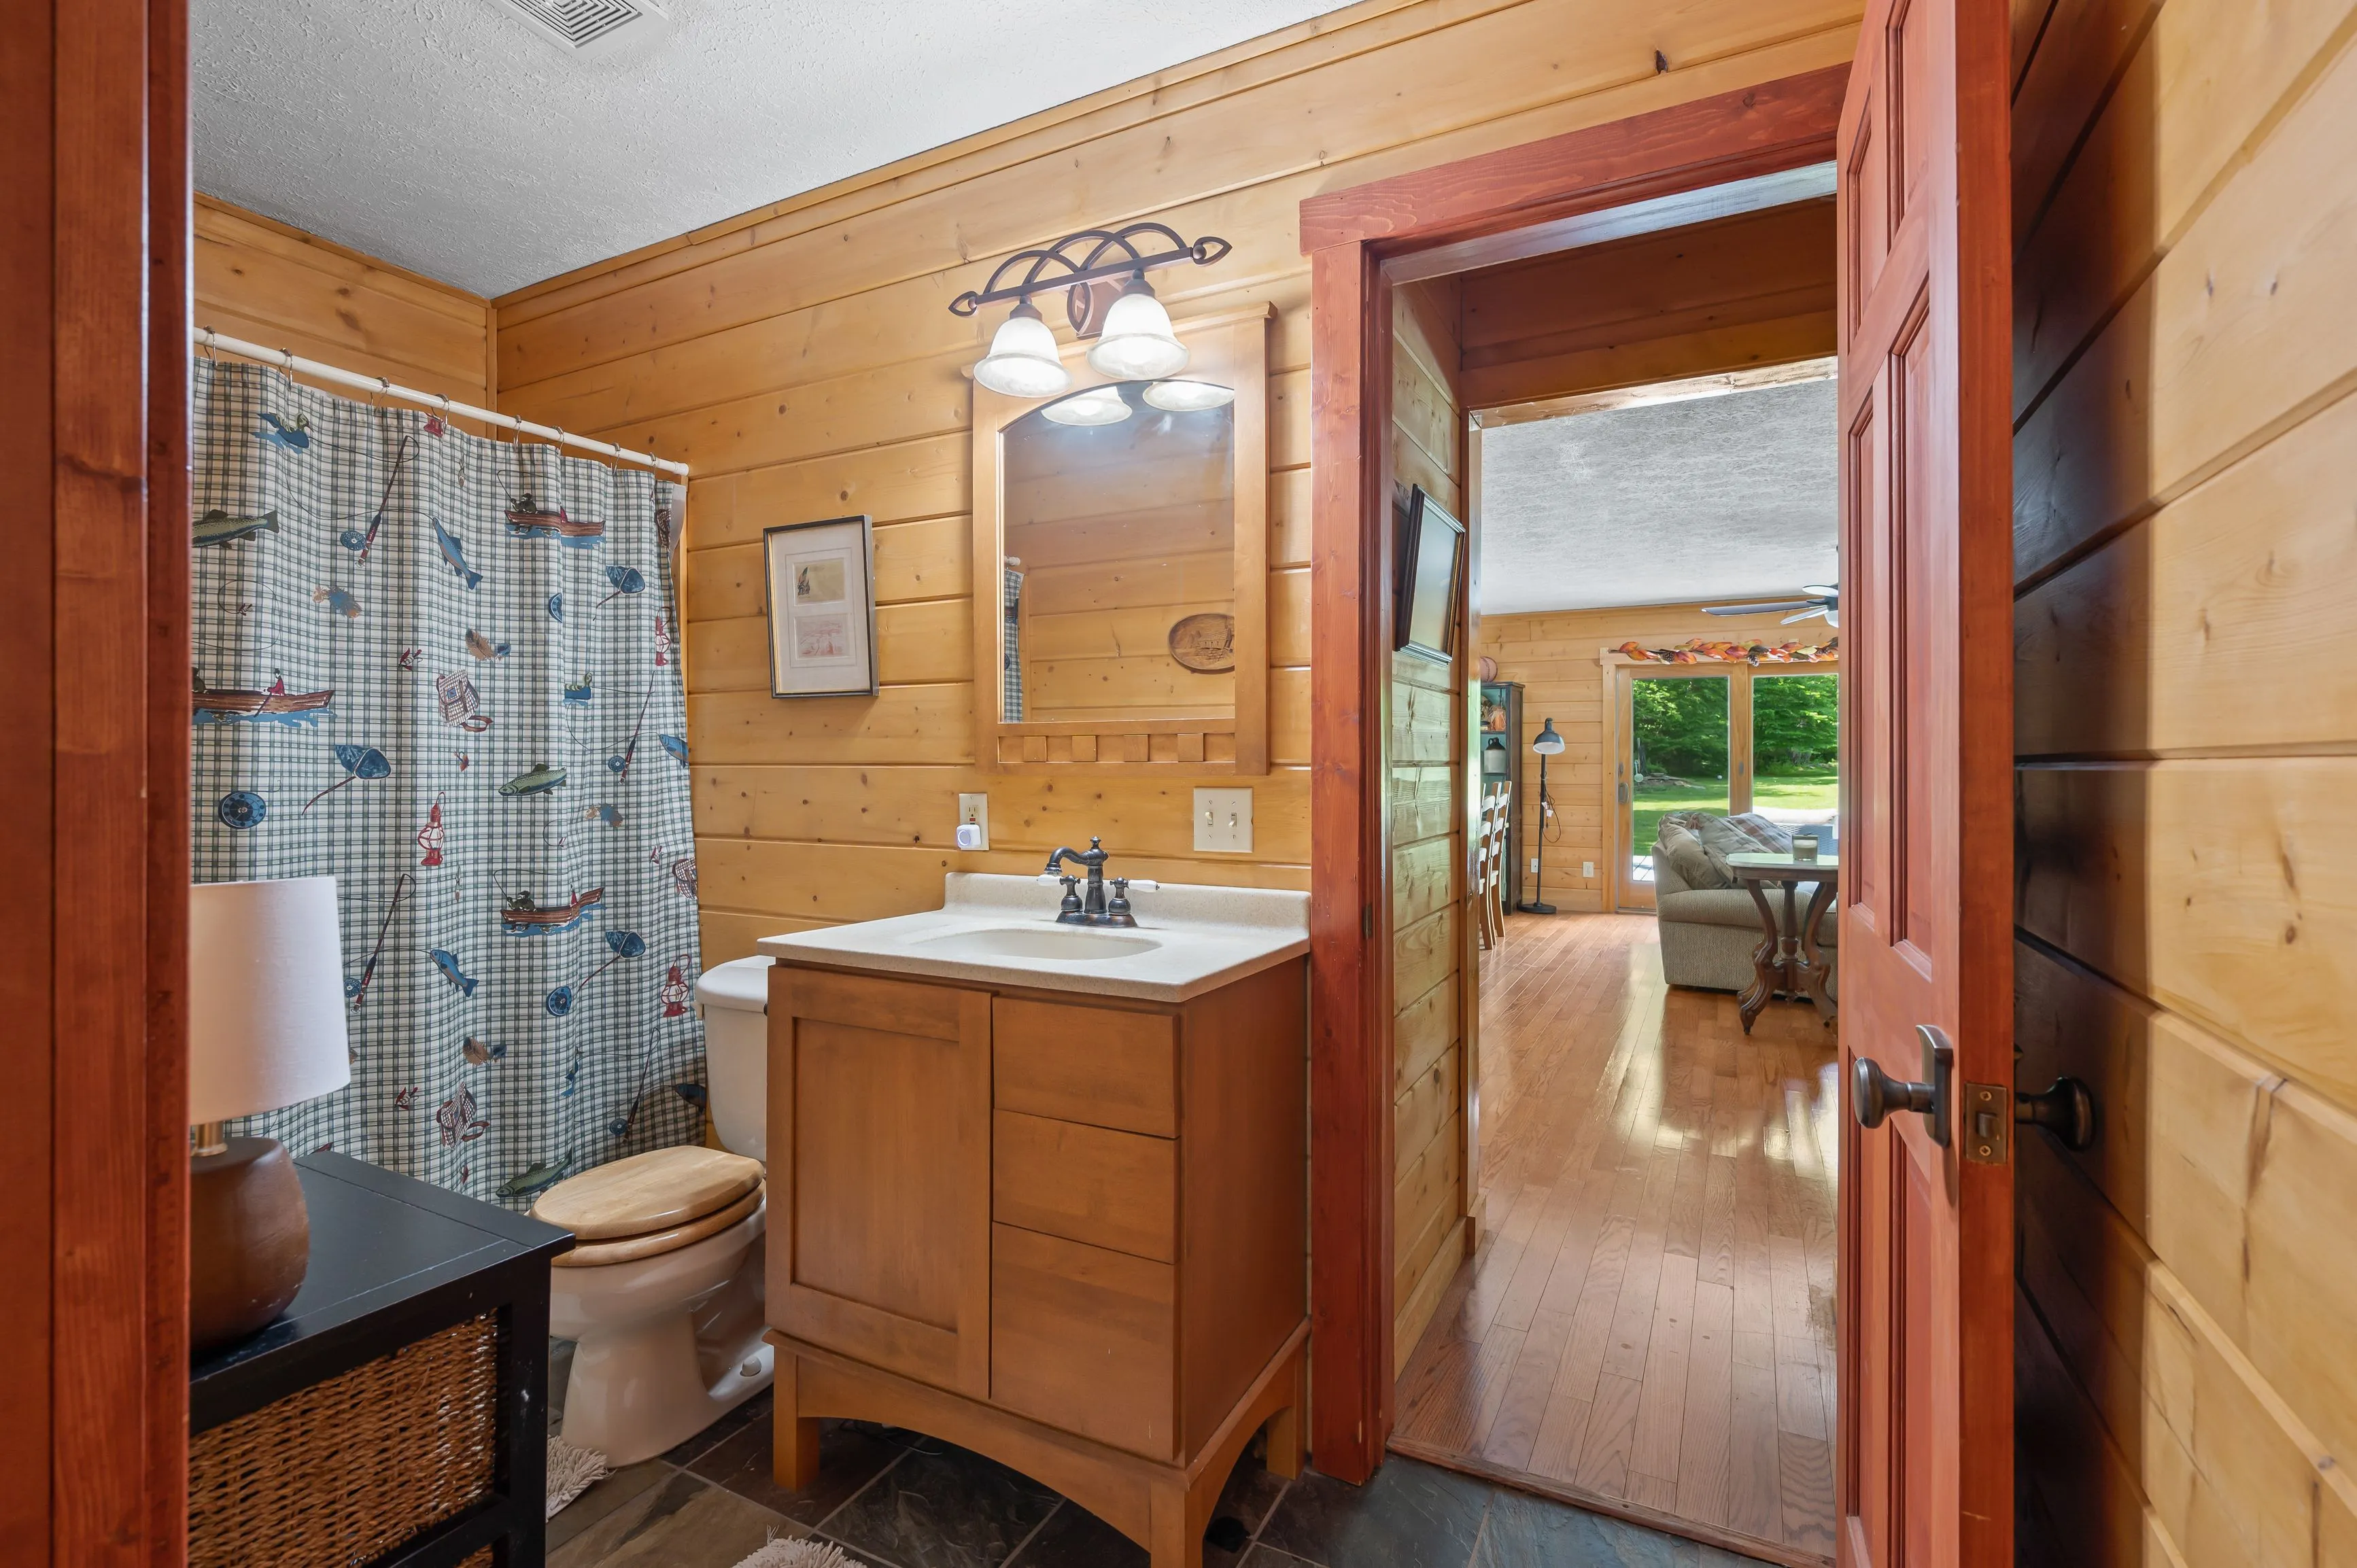 Interior of a rustic bathroom with wood paneling, showing a sink vanity, toilet, and shower curtain with a fishing motif, viewed through an open door leading to a living area.